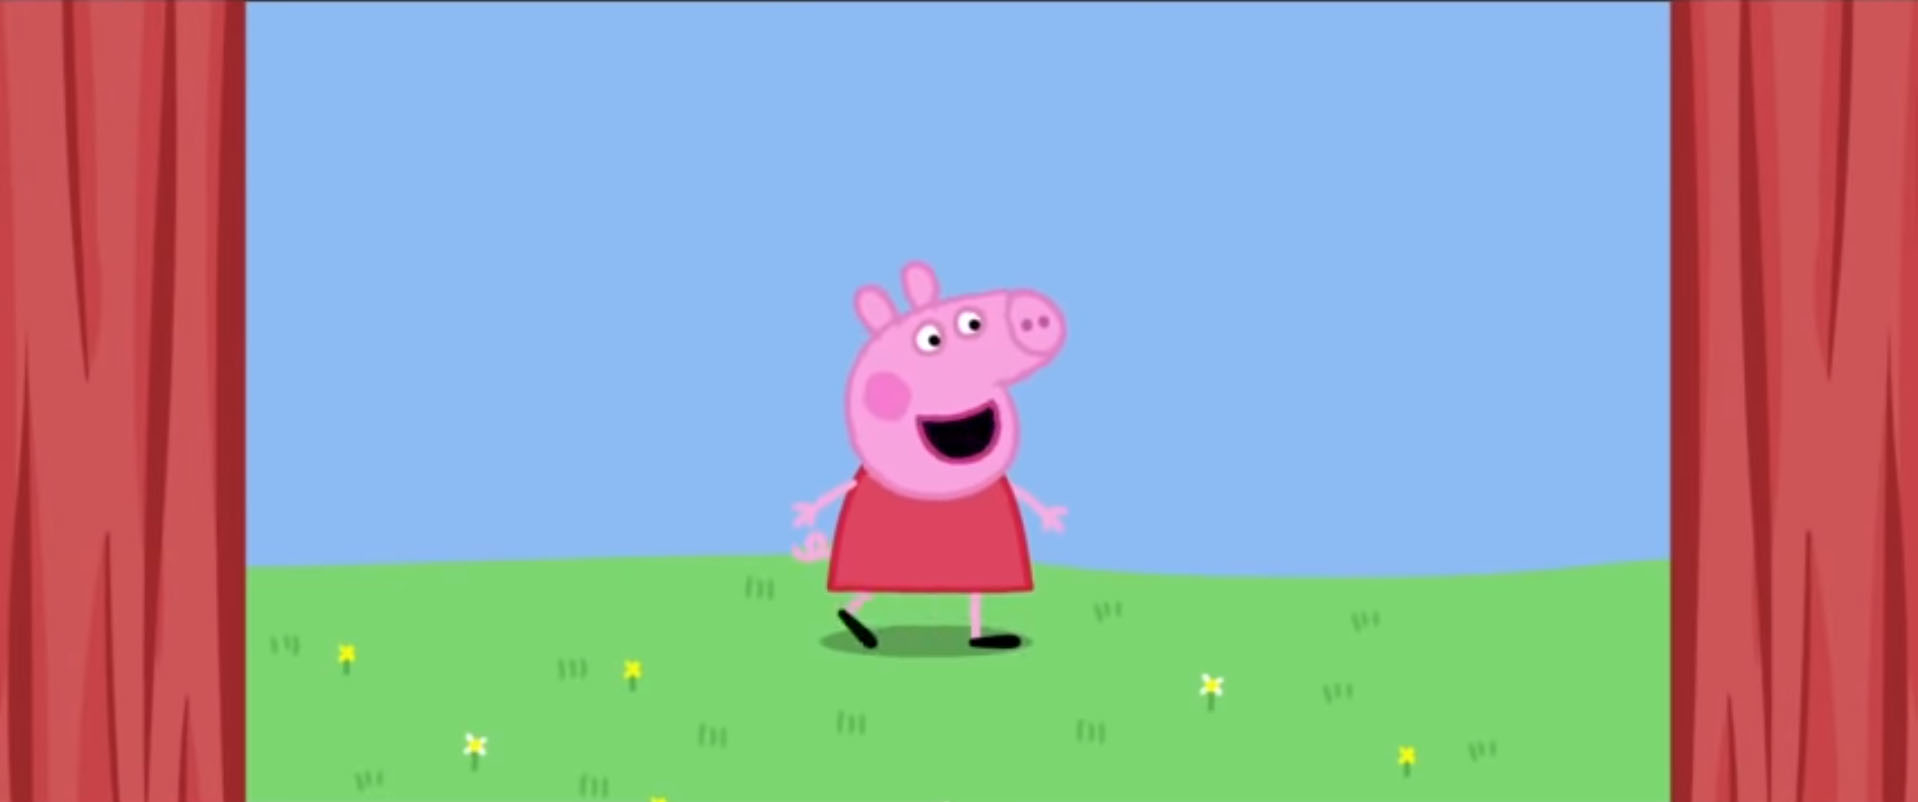 Peppa Pig character standing on stage with curtains on the sides